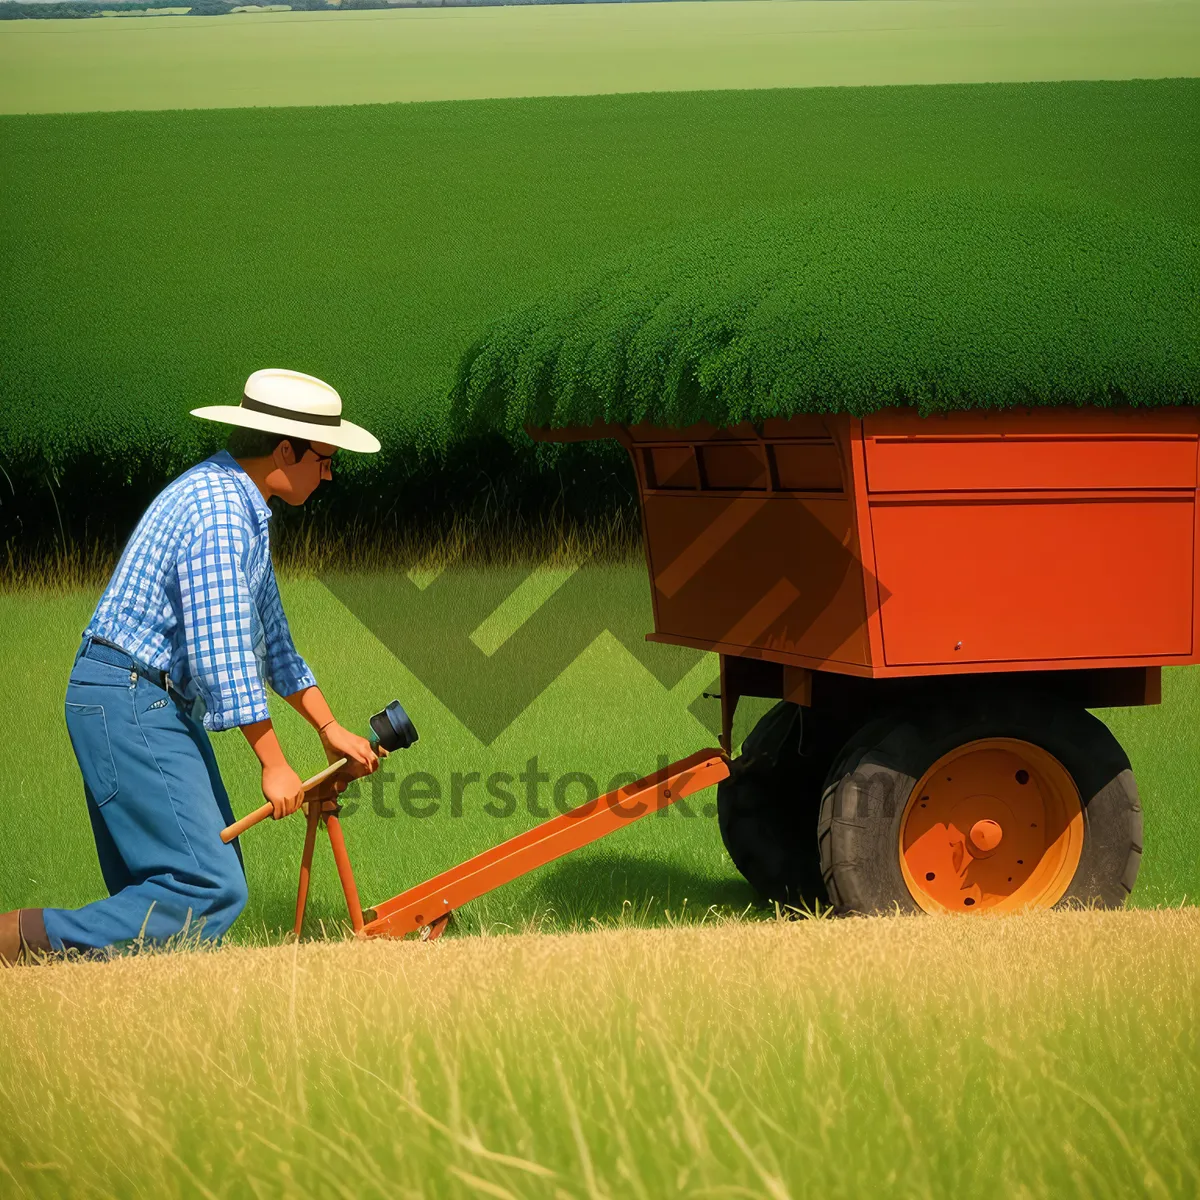 Picture of Harvester in Wheat Field”